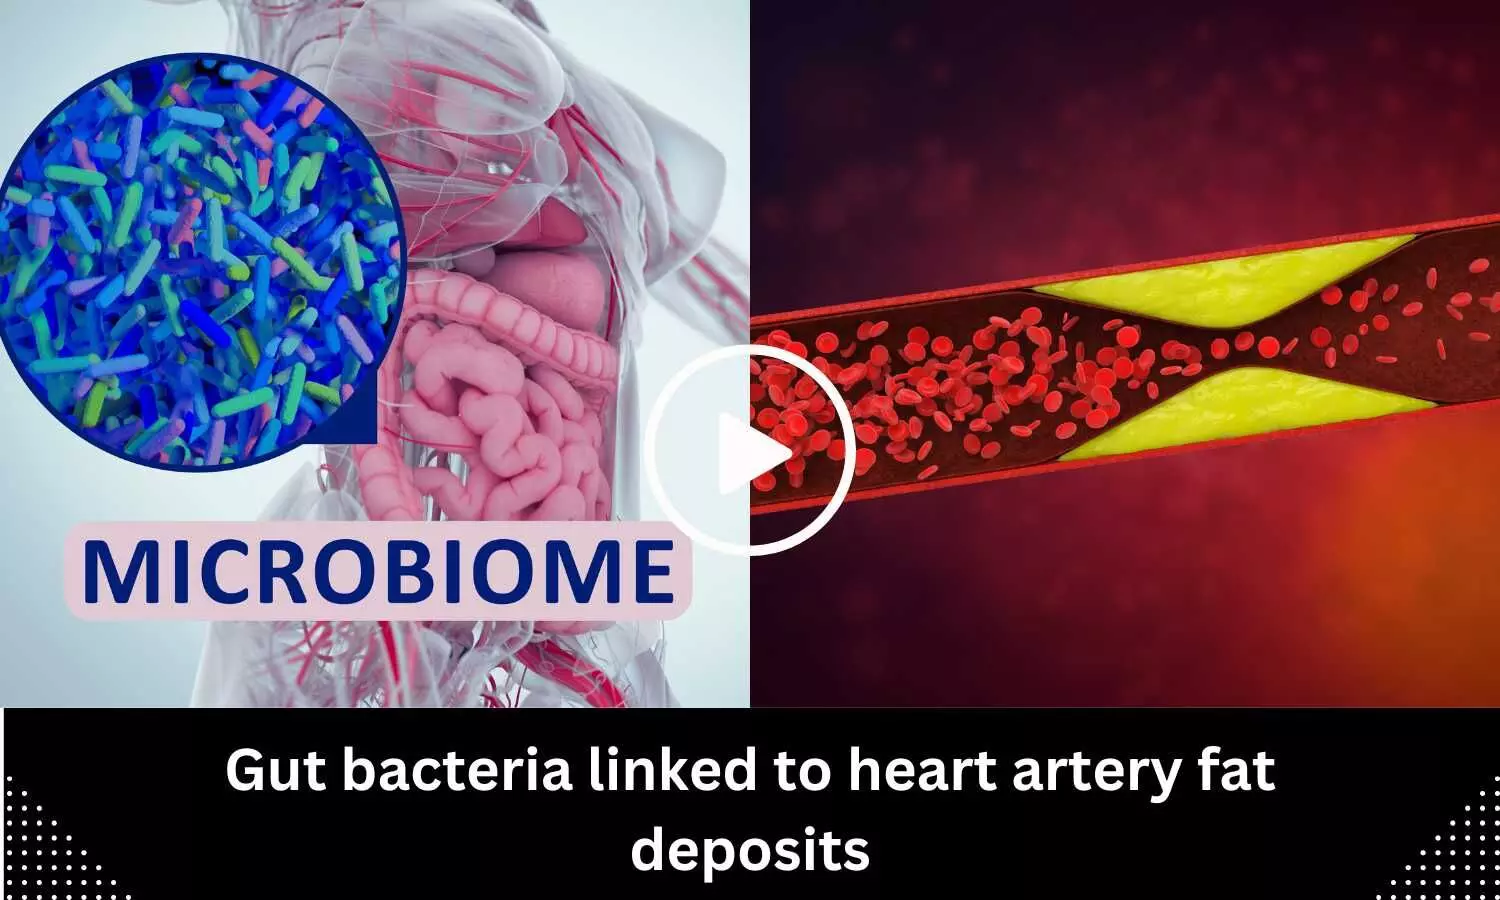 Gut bacteria linked to heart artery fat deposits